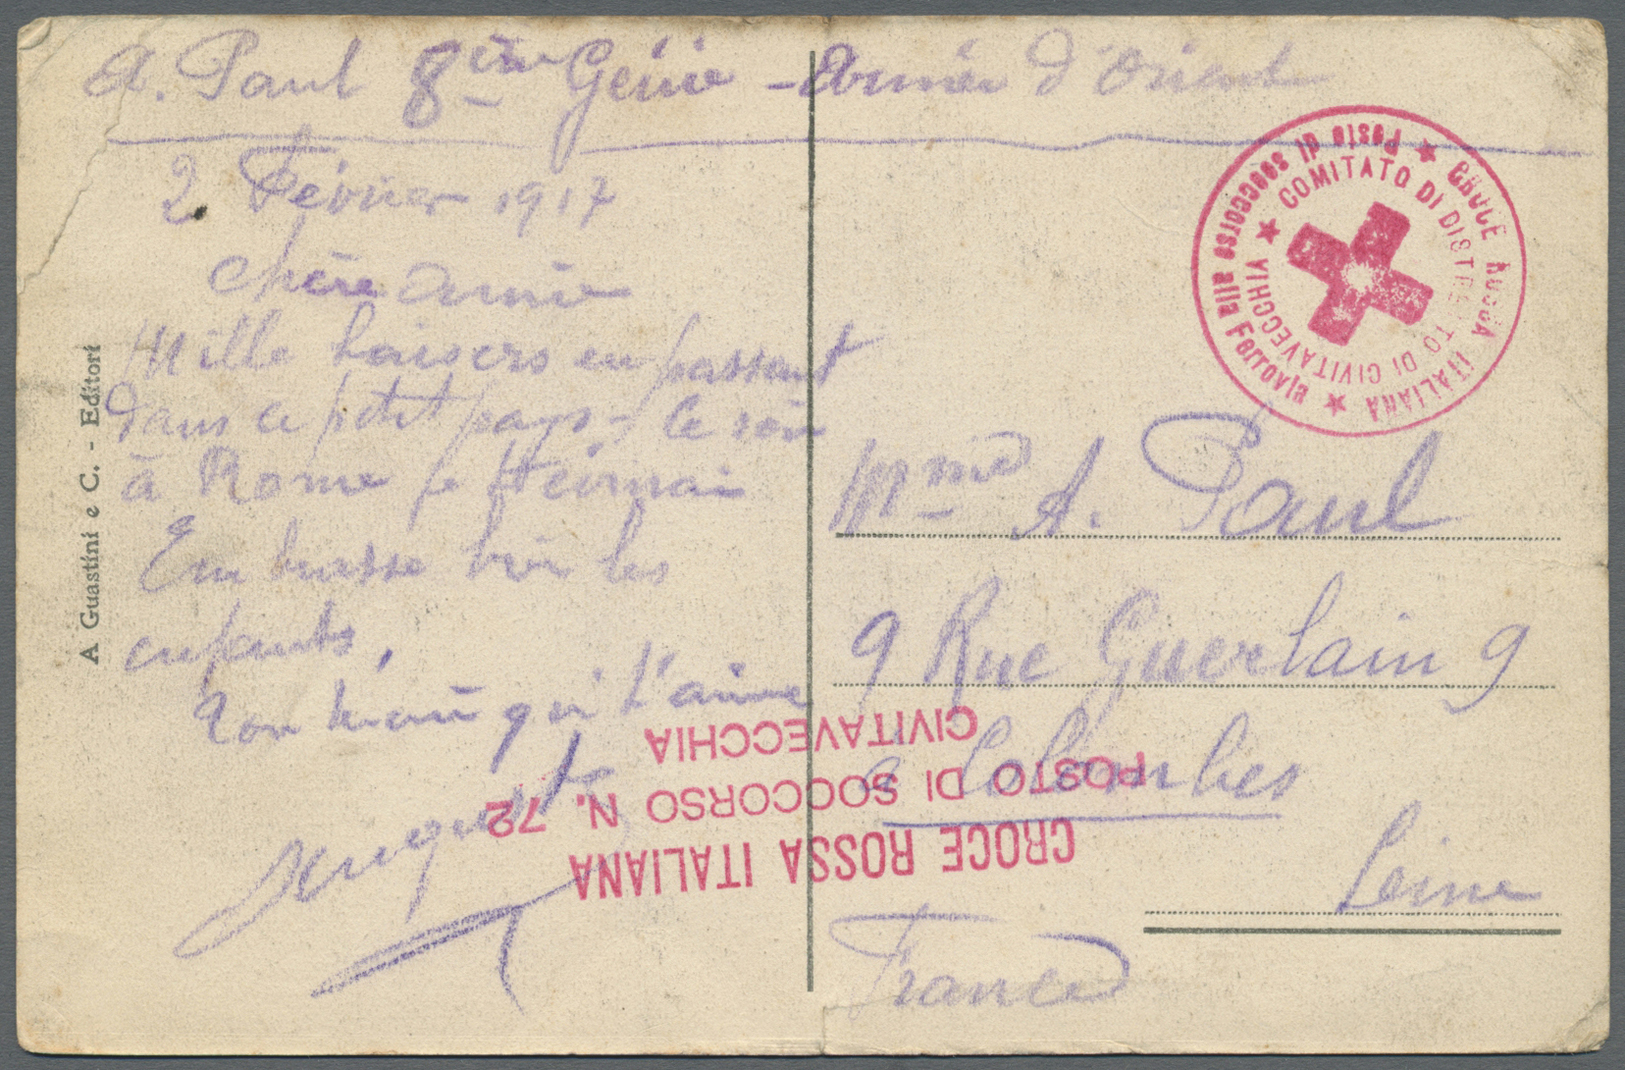 Br Italien - Besonderheiten: 1917. Picture Post Card Of 'The Viale Pisani, Grasseto' Addressed To France Endorsed - Unclassified